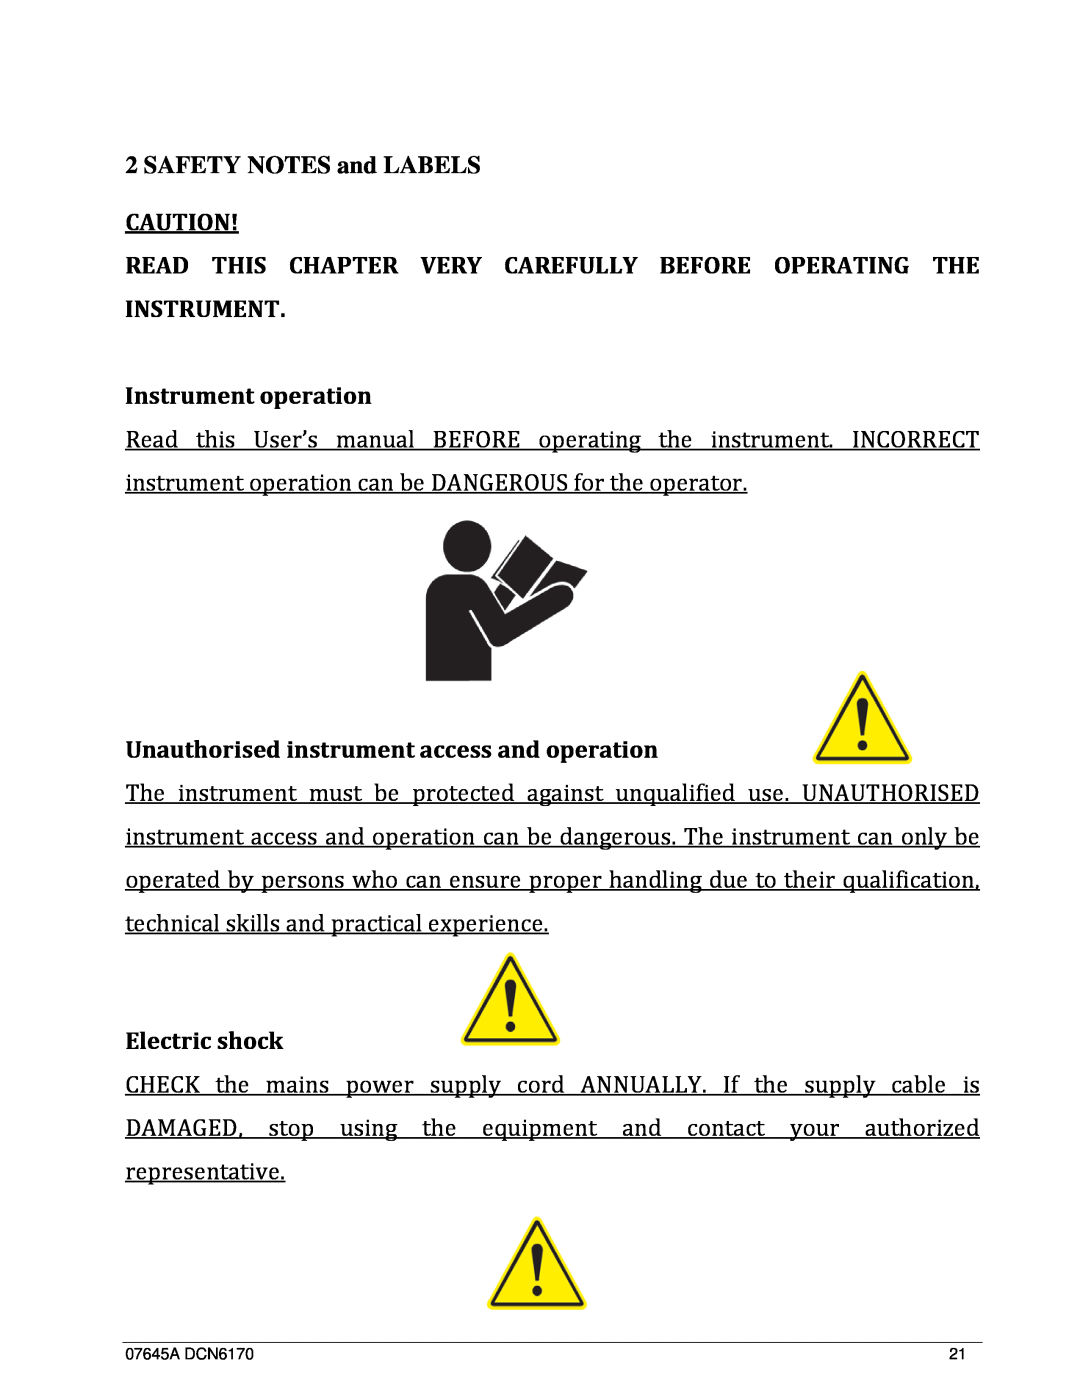 Teledyne 633 SAFETY NOTES and LABELS, Instrument operation, Unauthorised instrument access and operation, Electric shock 